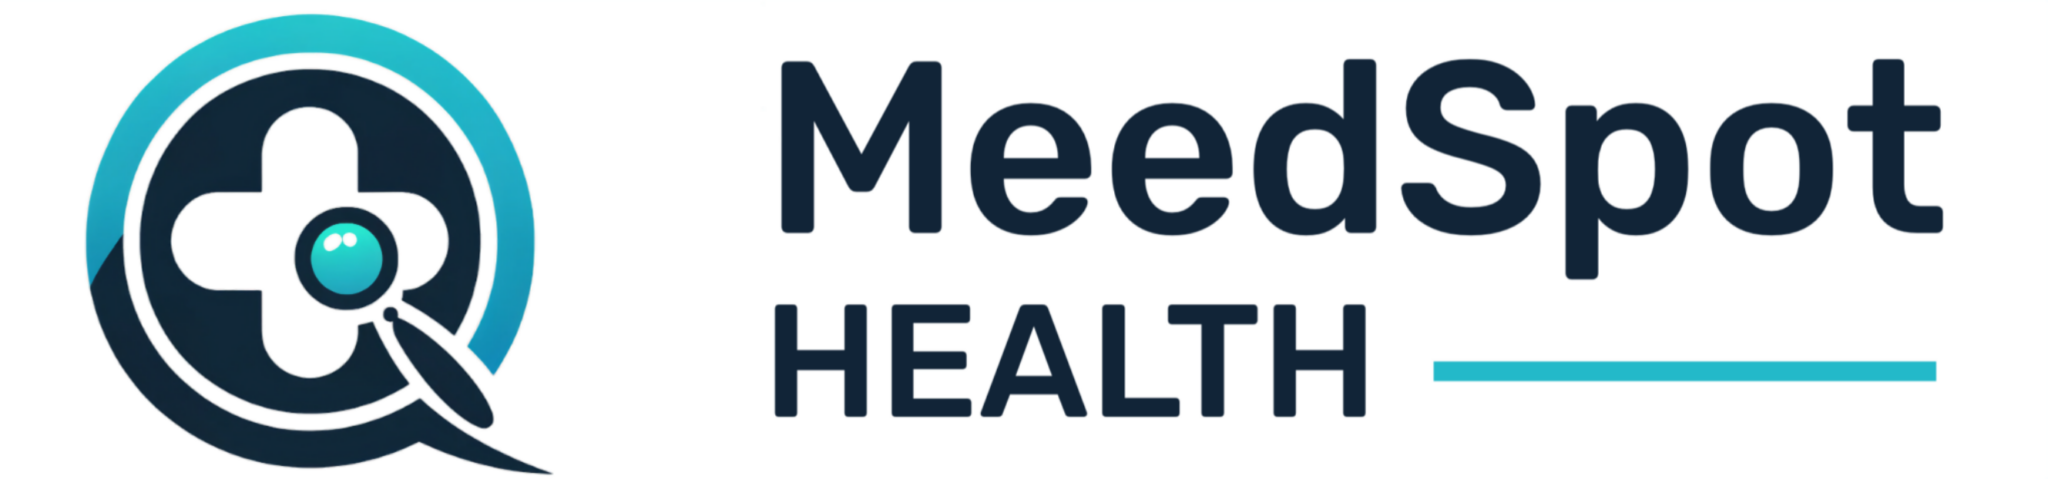 MeedSpot Health | Reliable medical information and health tips for informed decisions